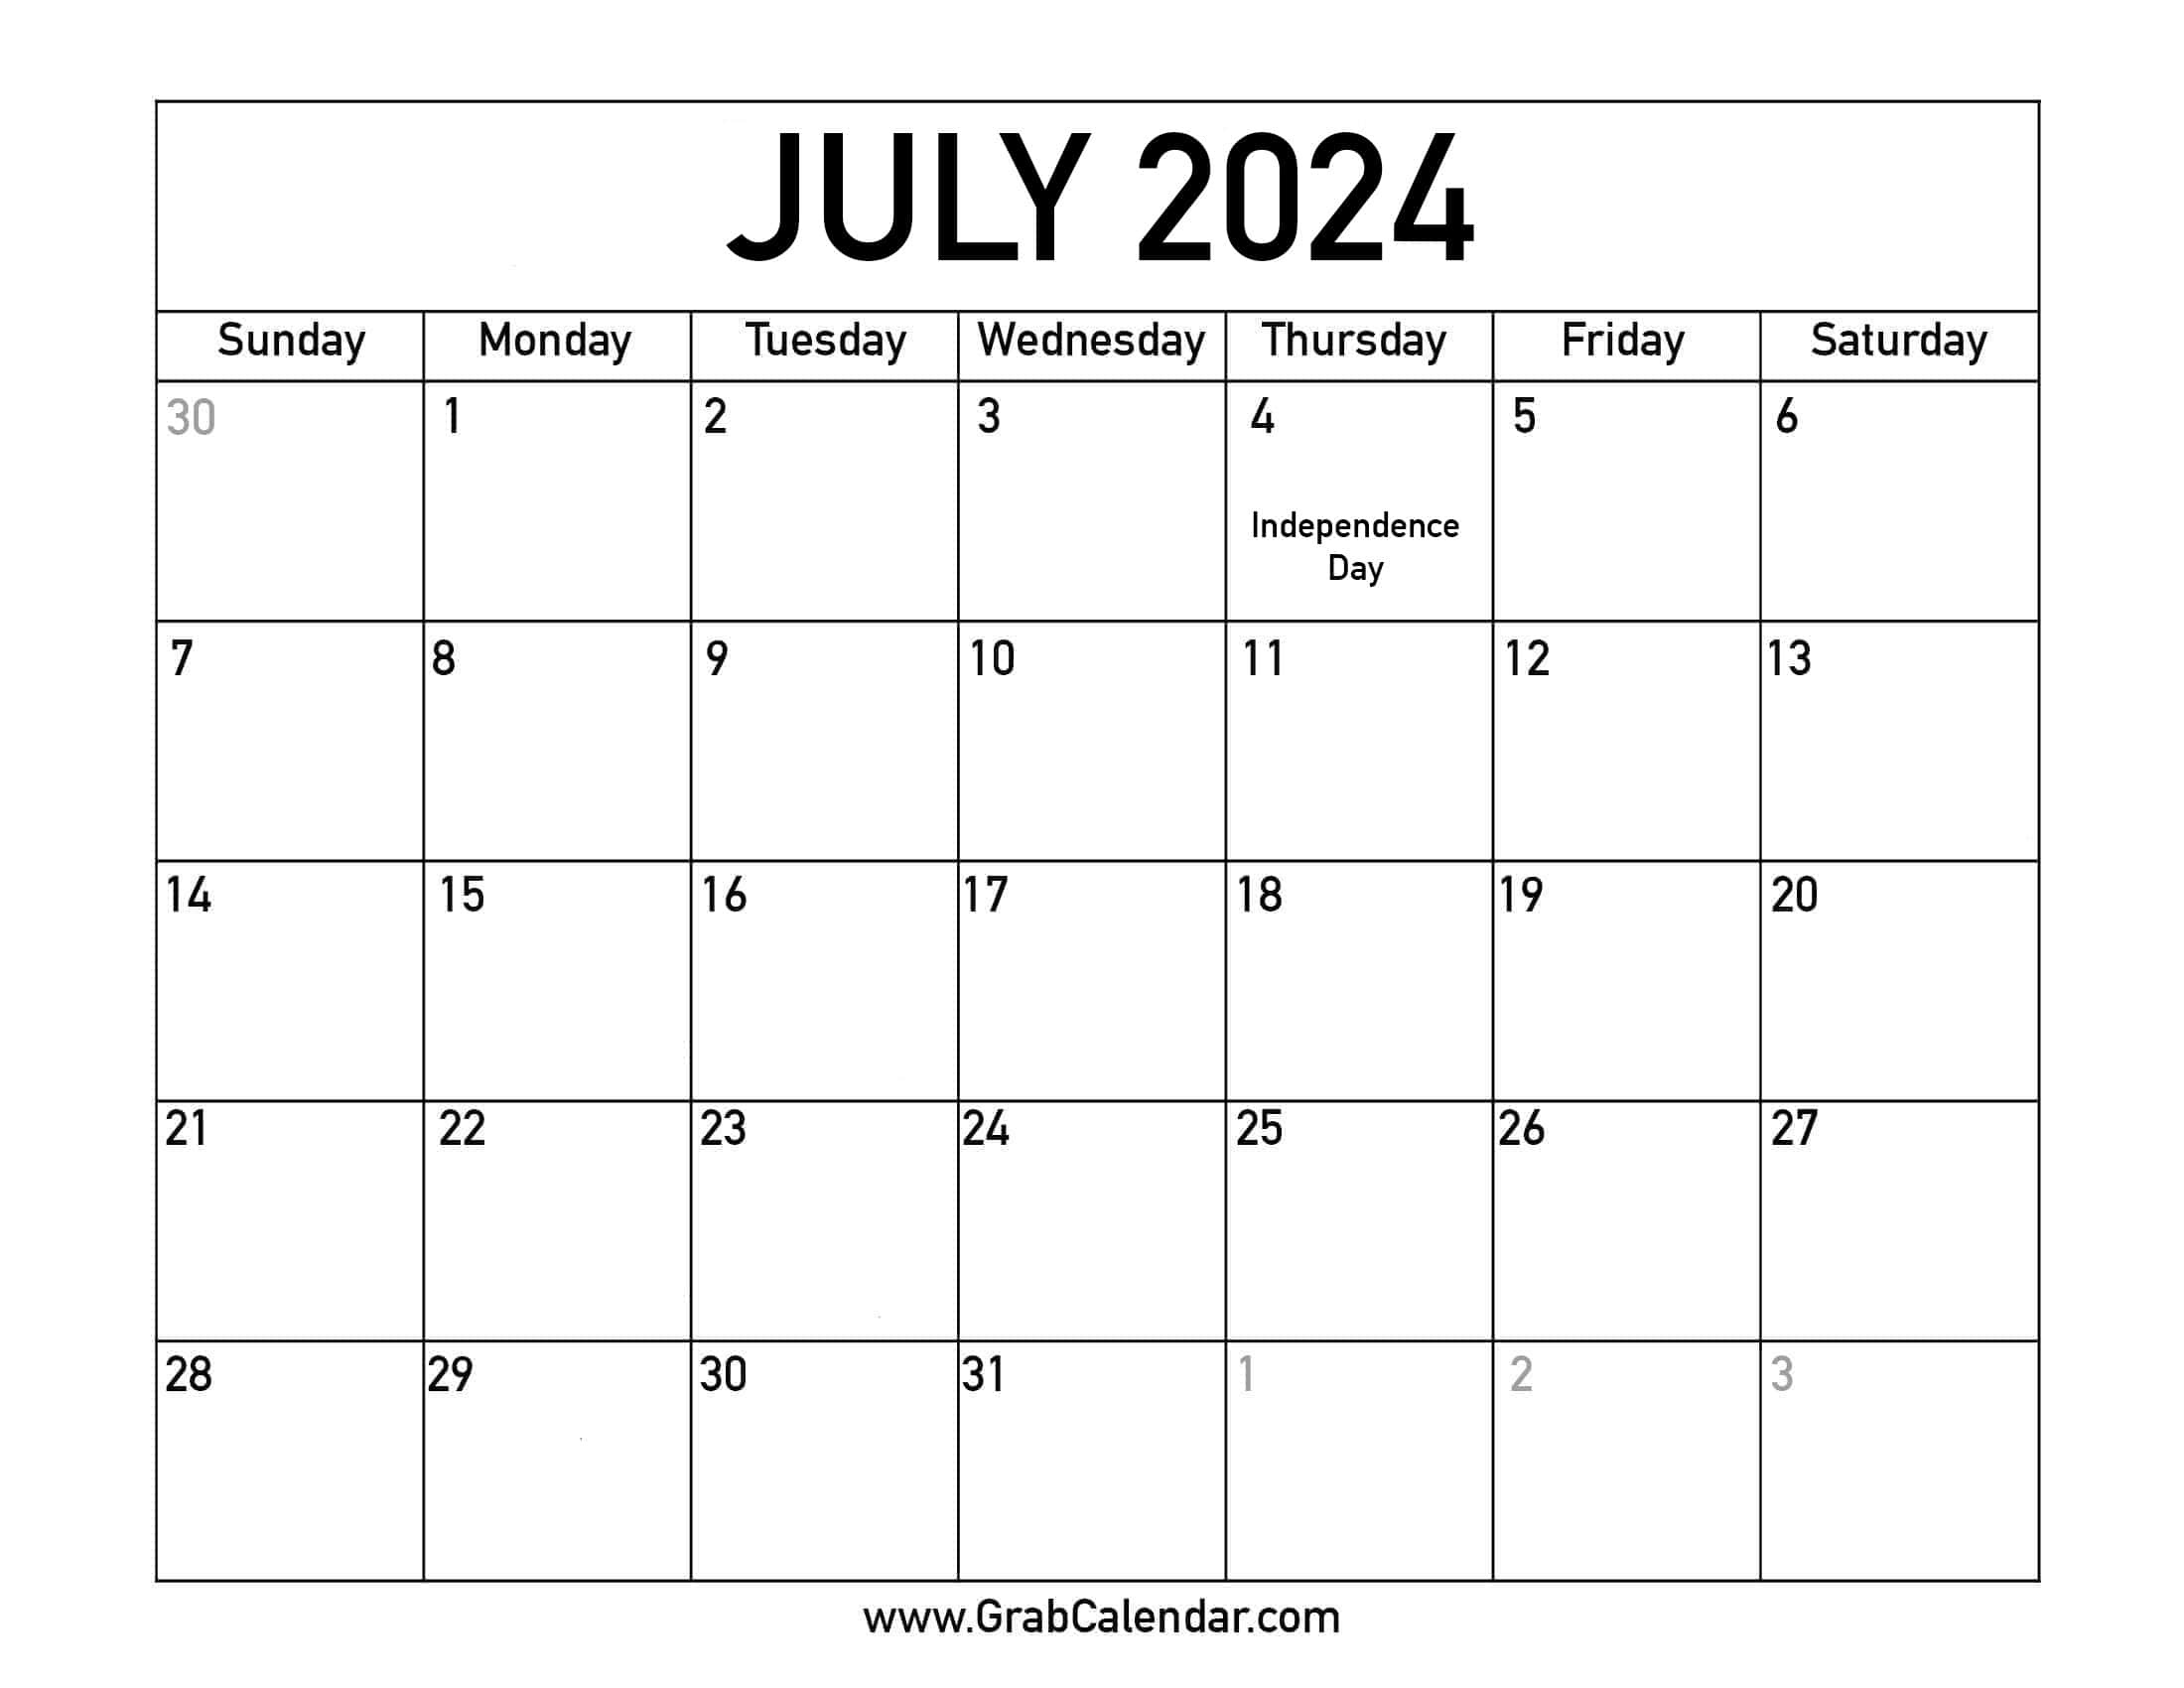 Printable July 2024 Calendar pertaining to July 2024 Calendar Events